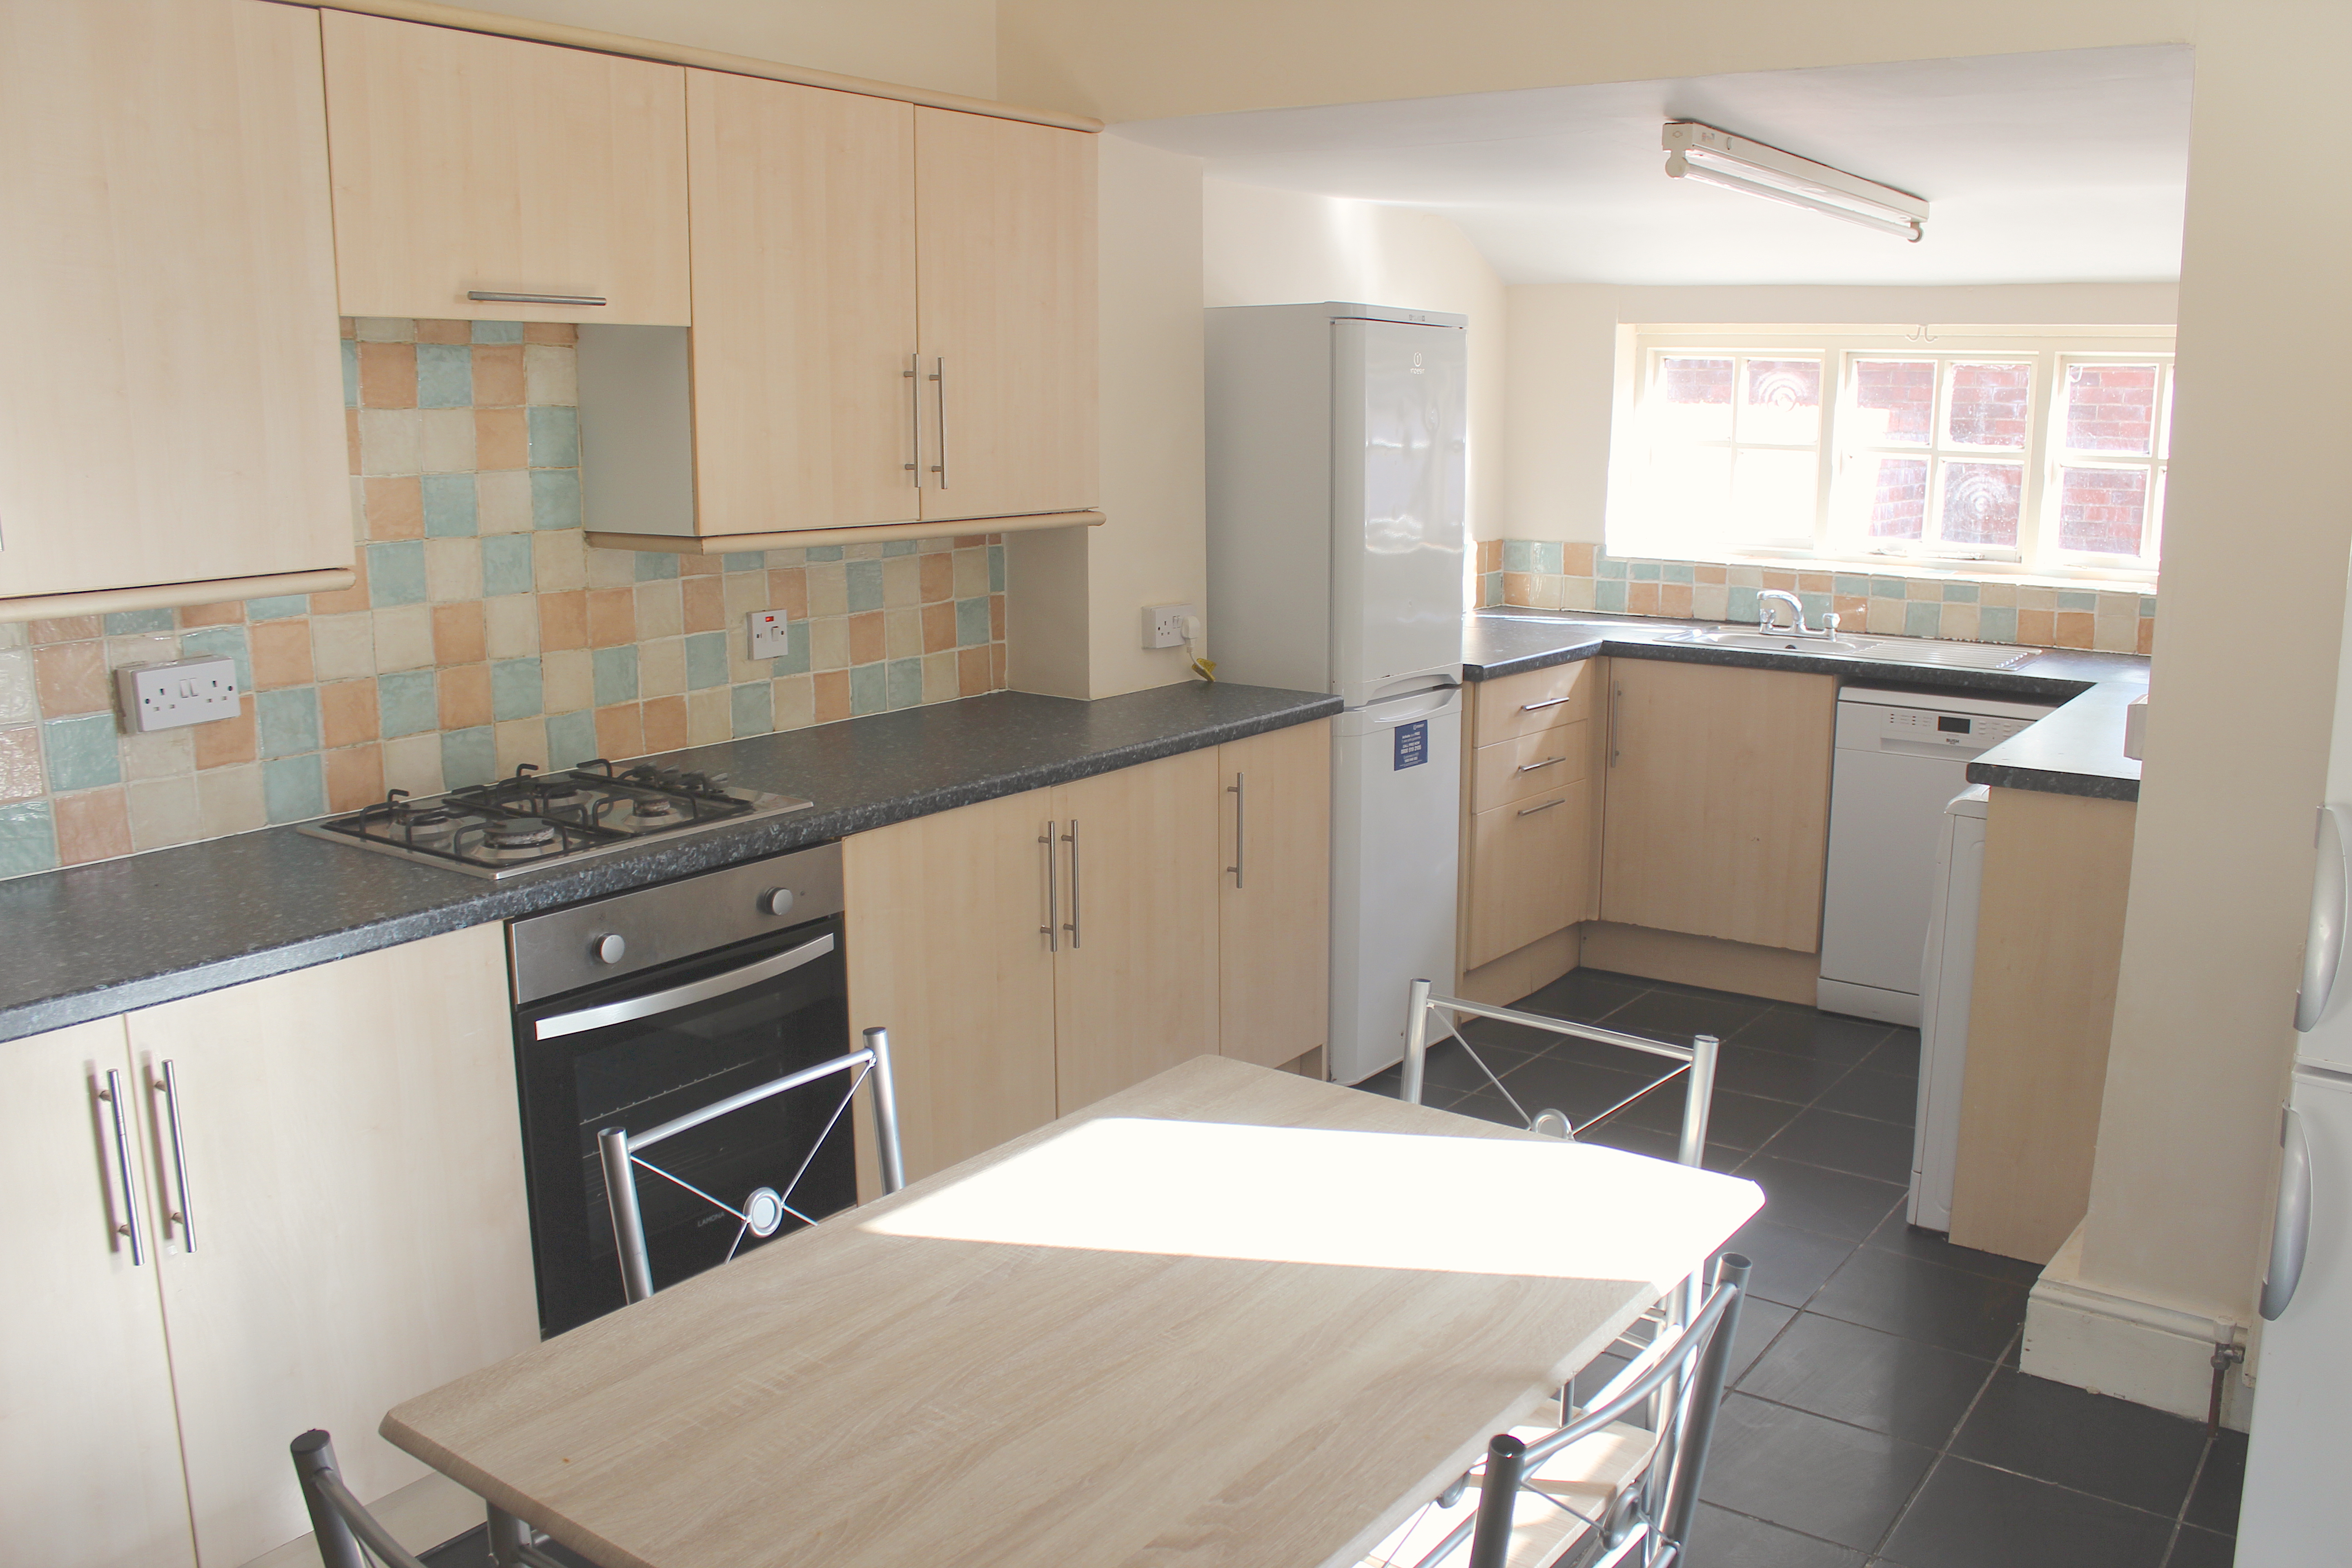 8 Bed Student House, Manor House Road NE2 £99.00 PPPW